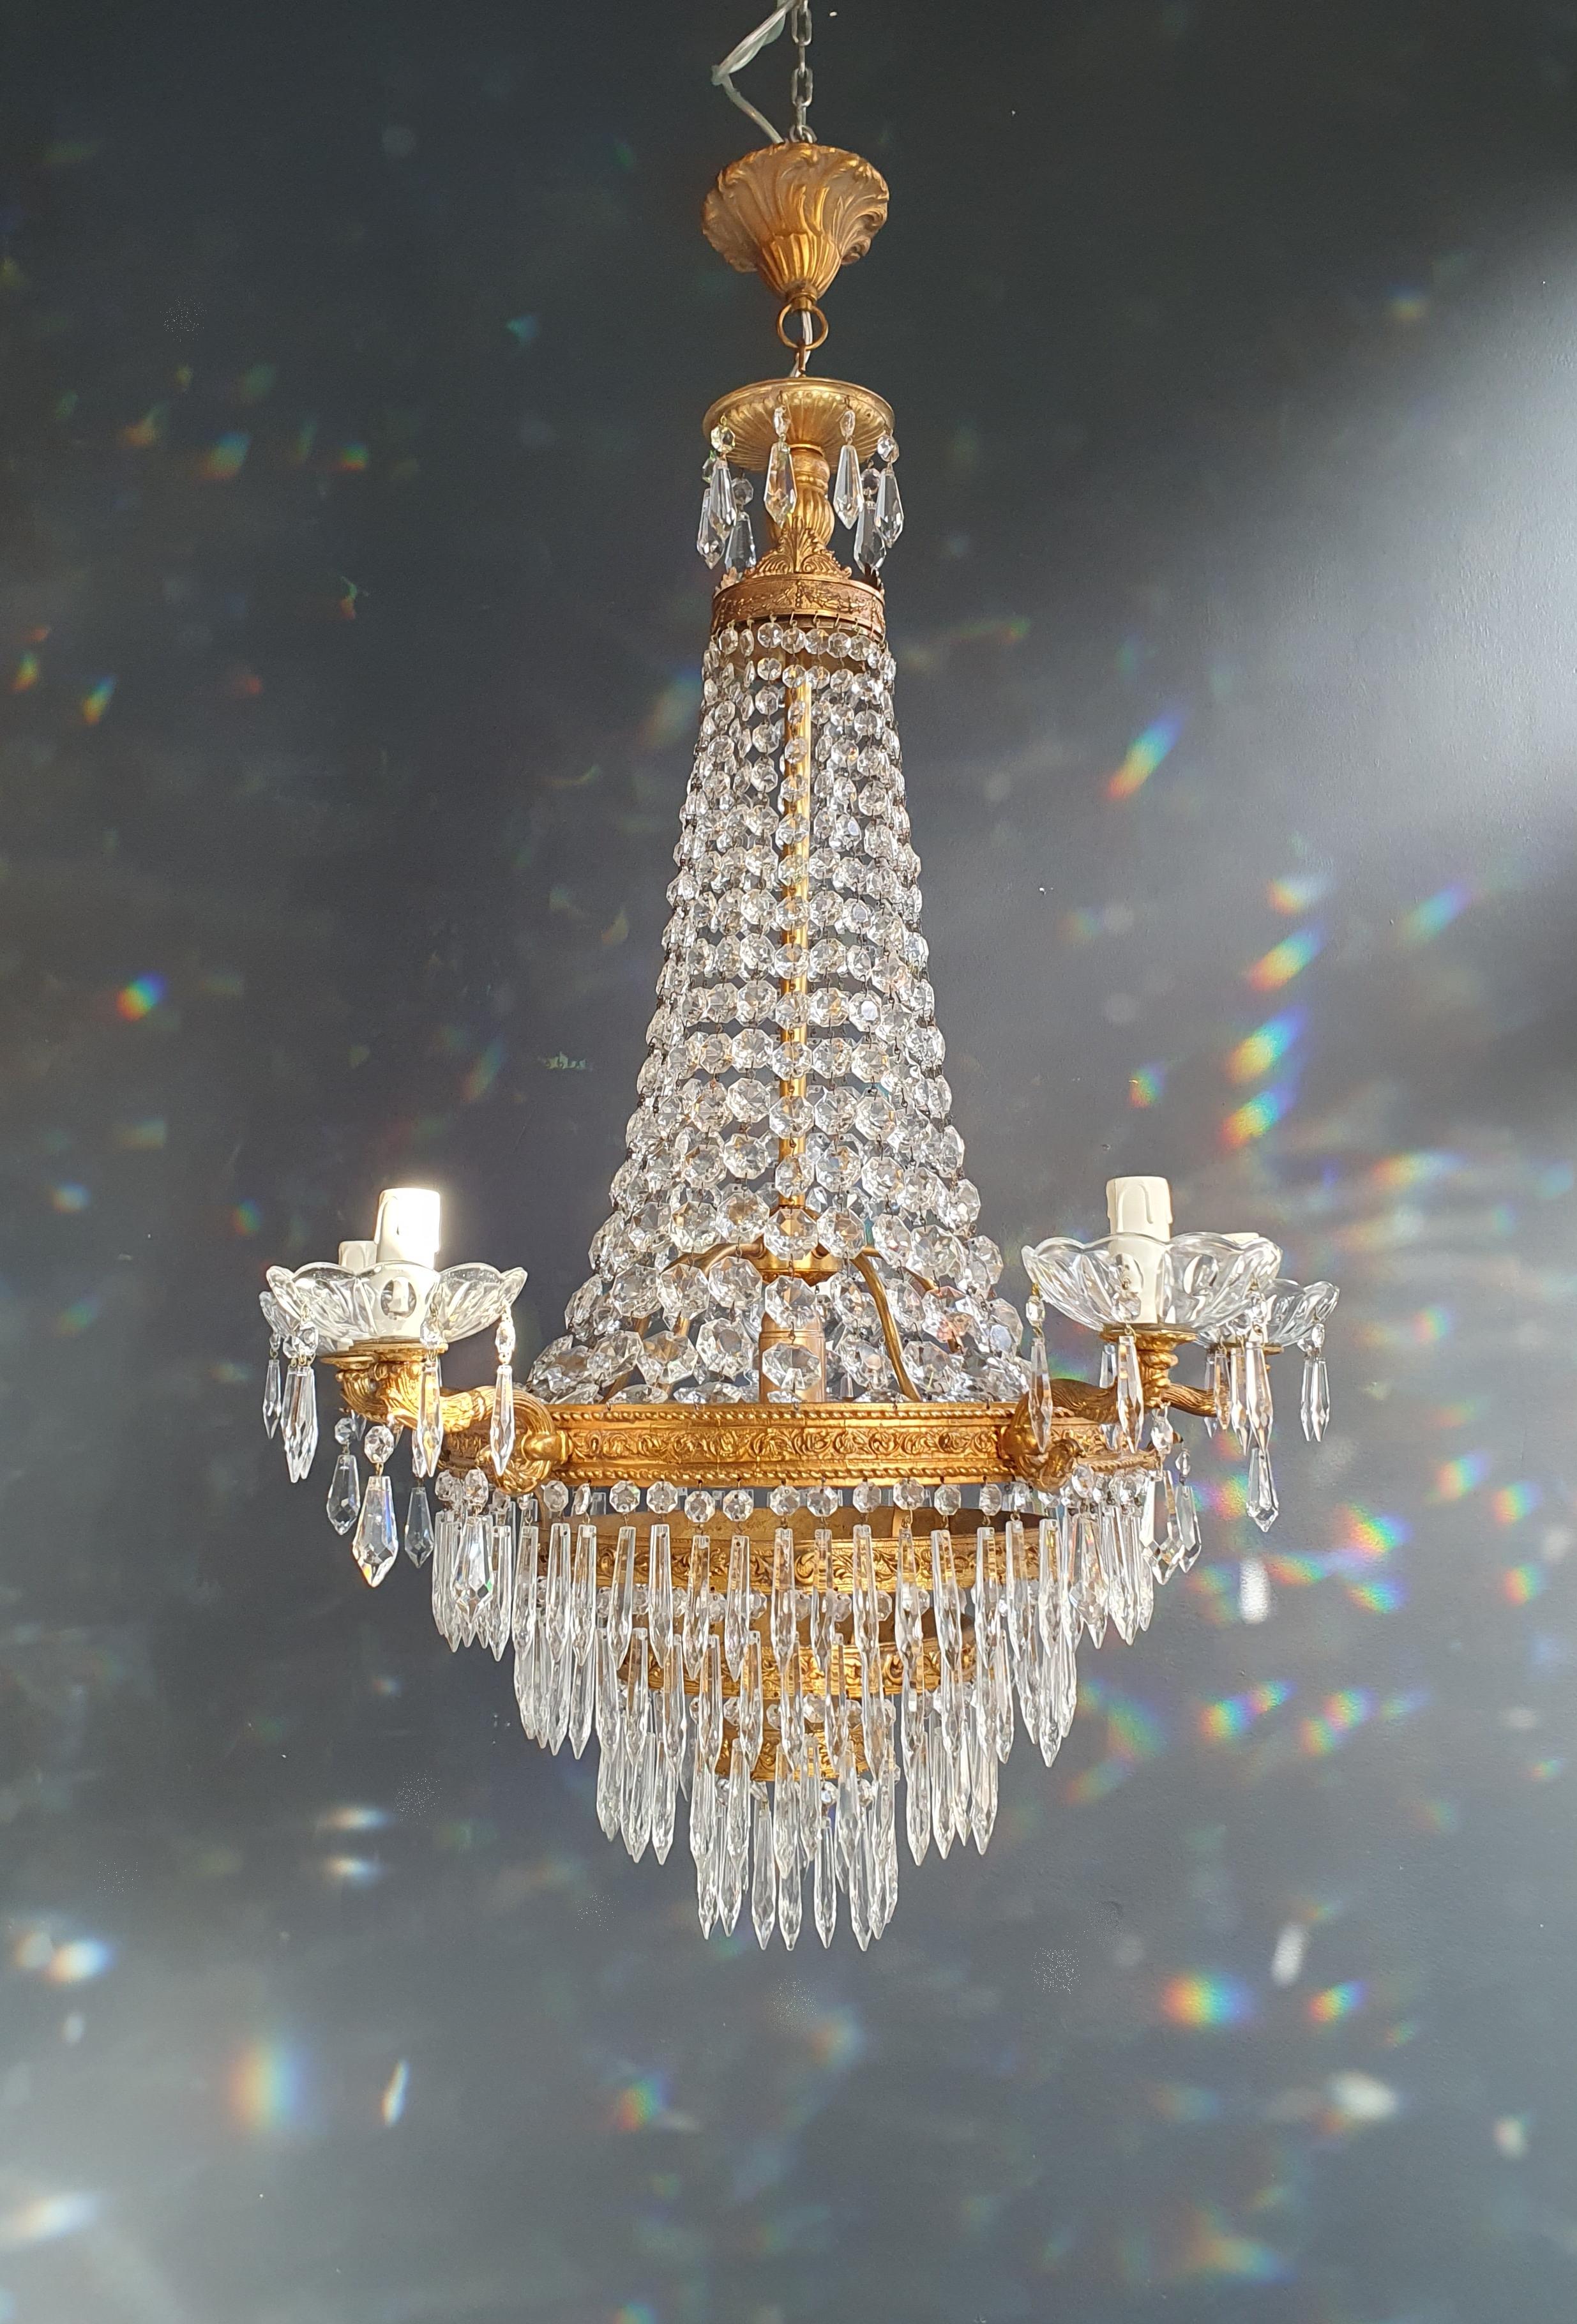 European Empire Brass Sac a Pearl Chandelier Crystal Lustre Ceiling Antique